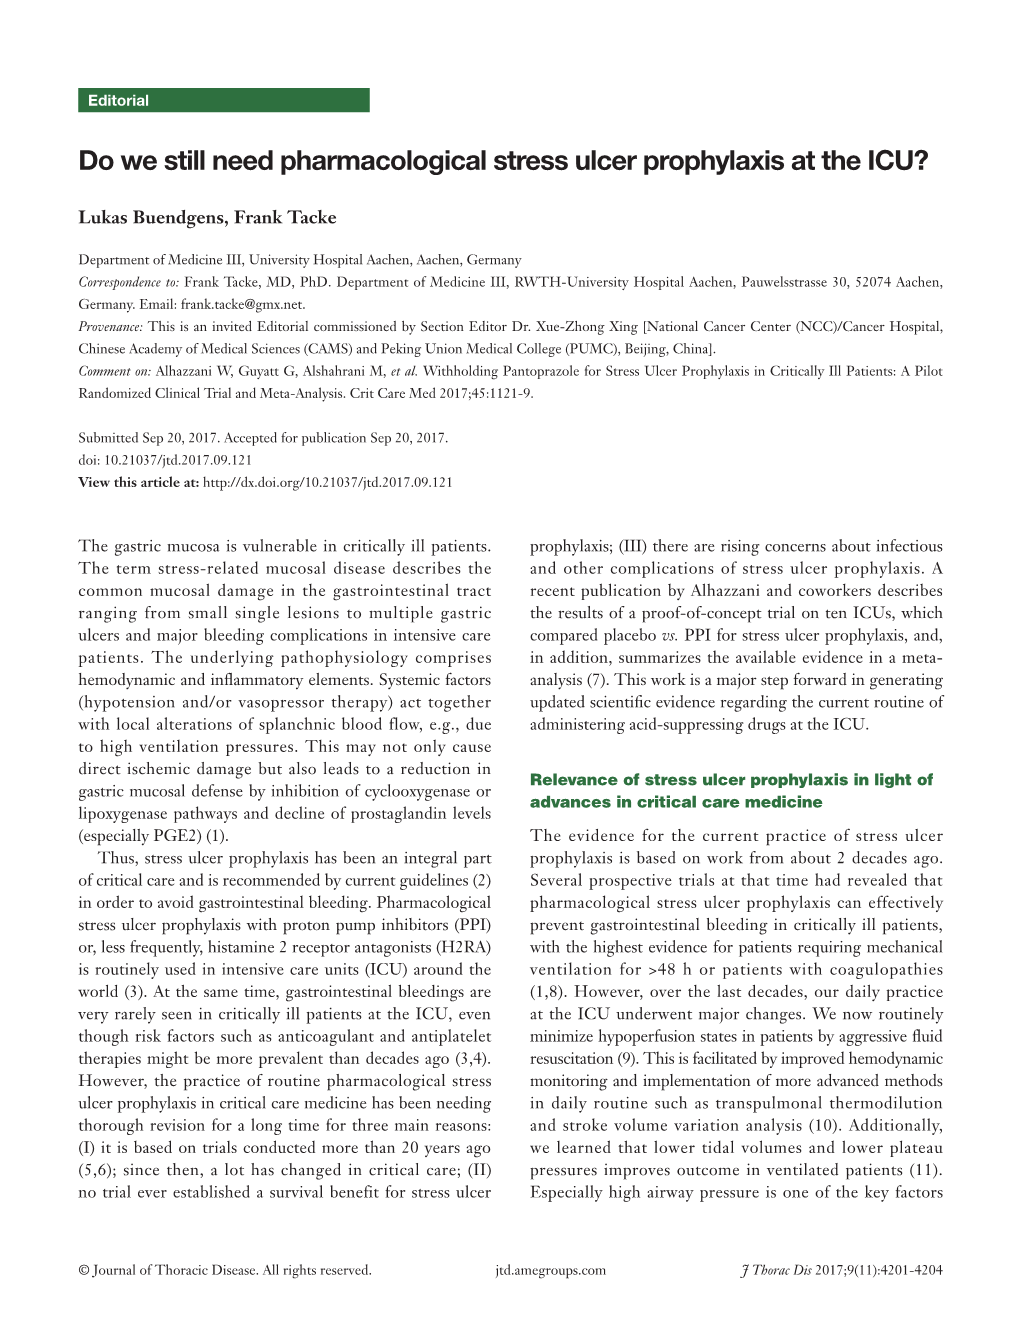 Do We Still Need Pharmacological Stress Ulcer Prophylaxis at the ICU?